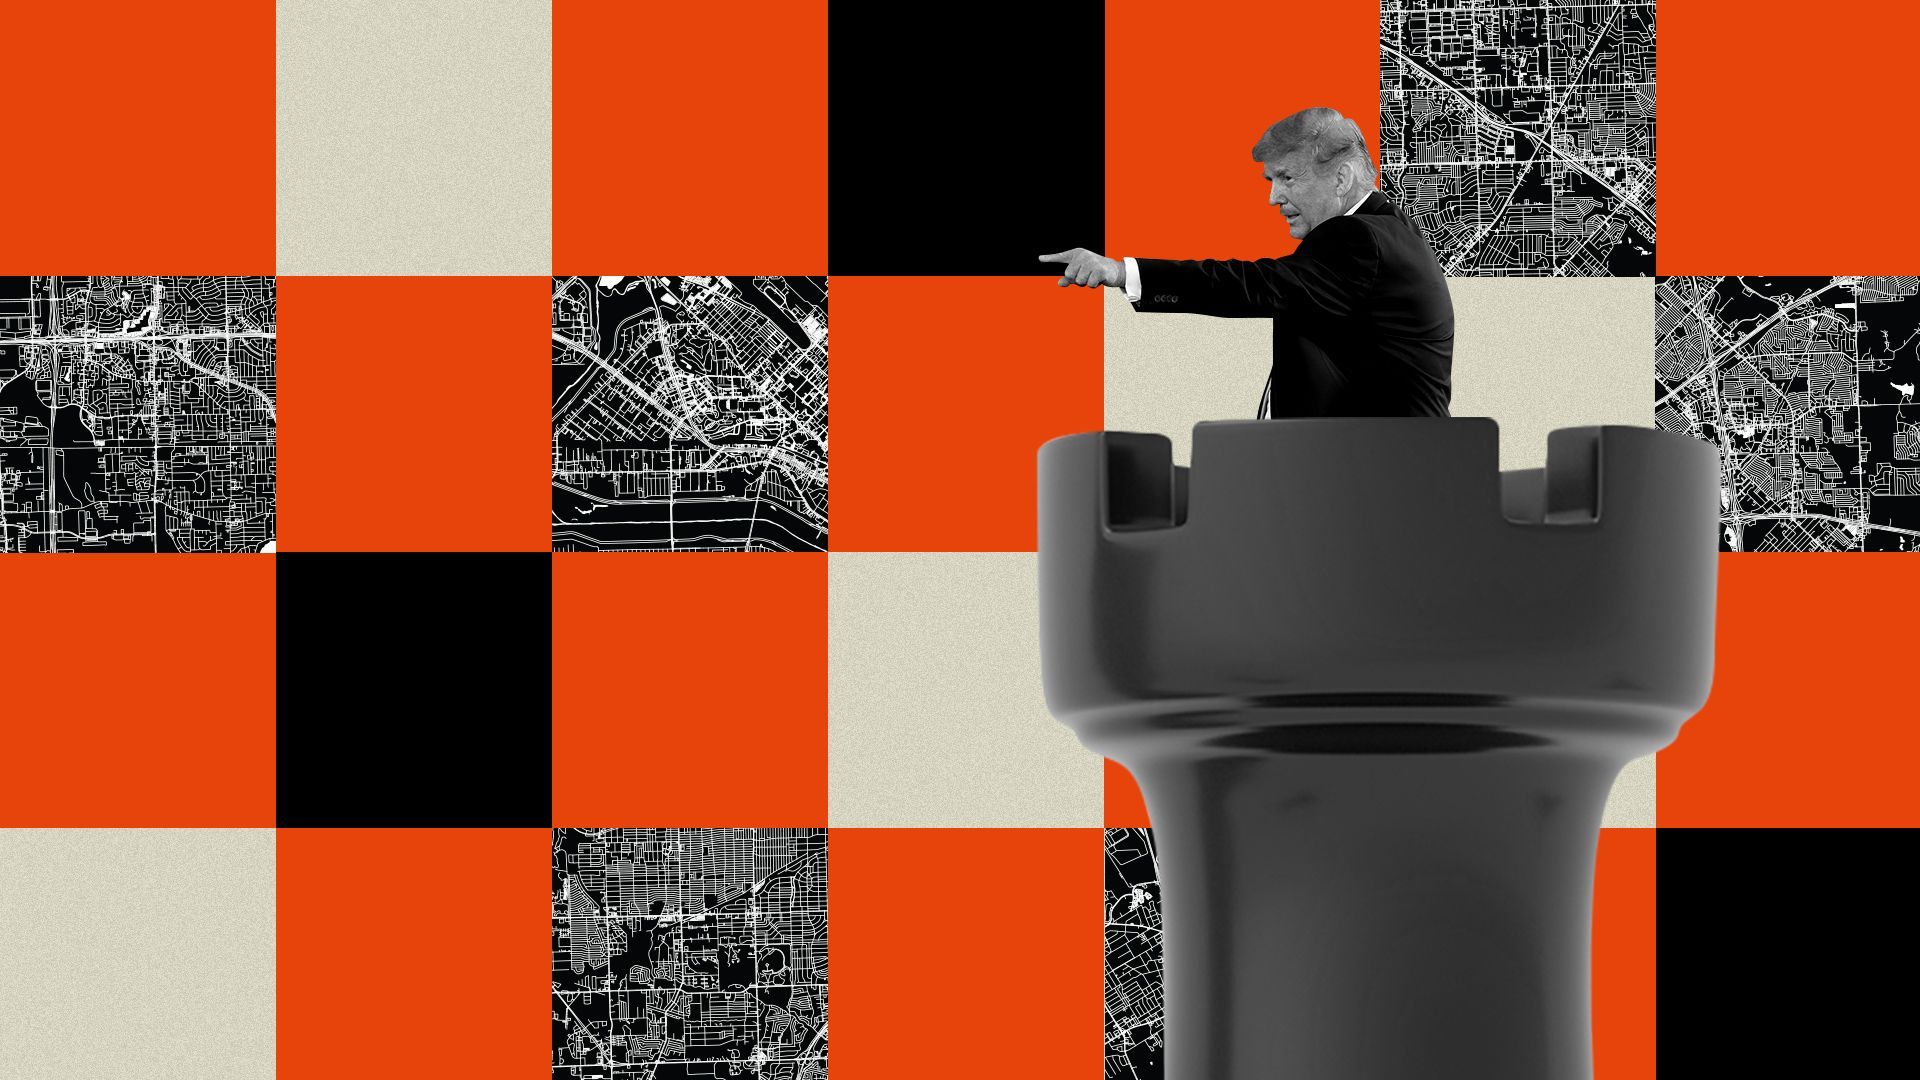 Photo illustration of Donald Trump pointing from atop a chess rook piece, against a chessboard background with some of the squares showing city maps. 